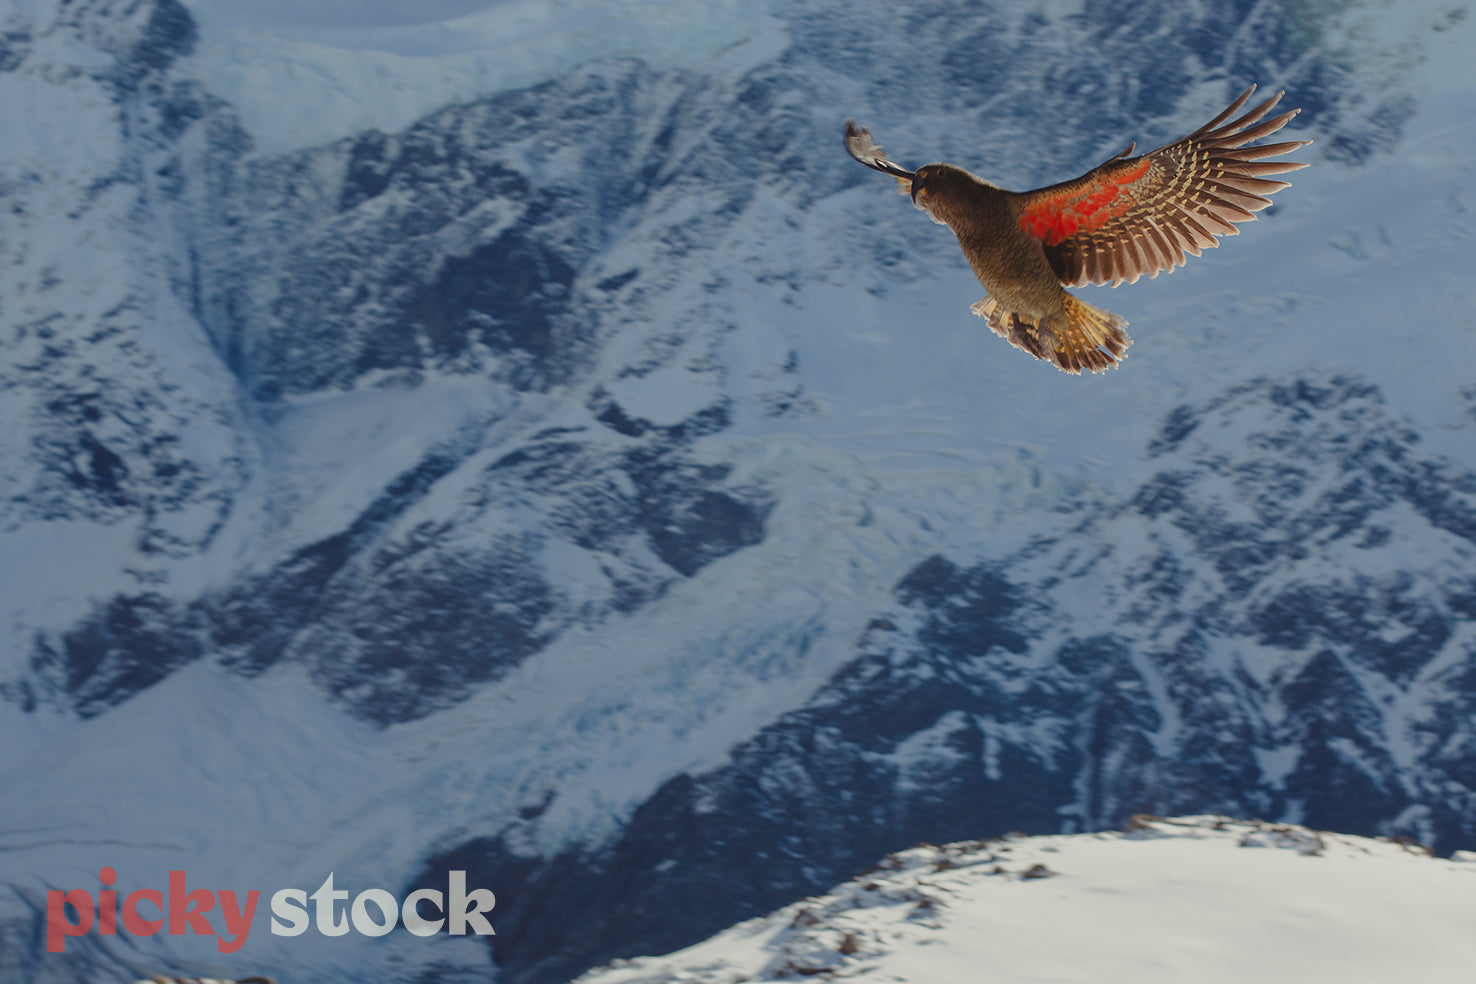 Kea inflight over snowy Mount Cook. Both wings are out.